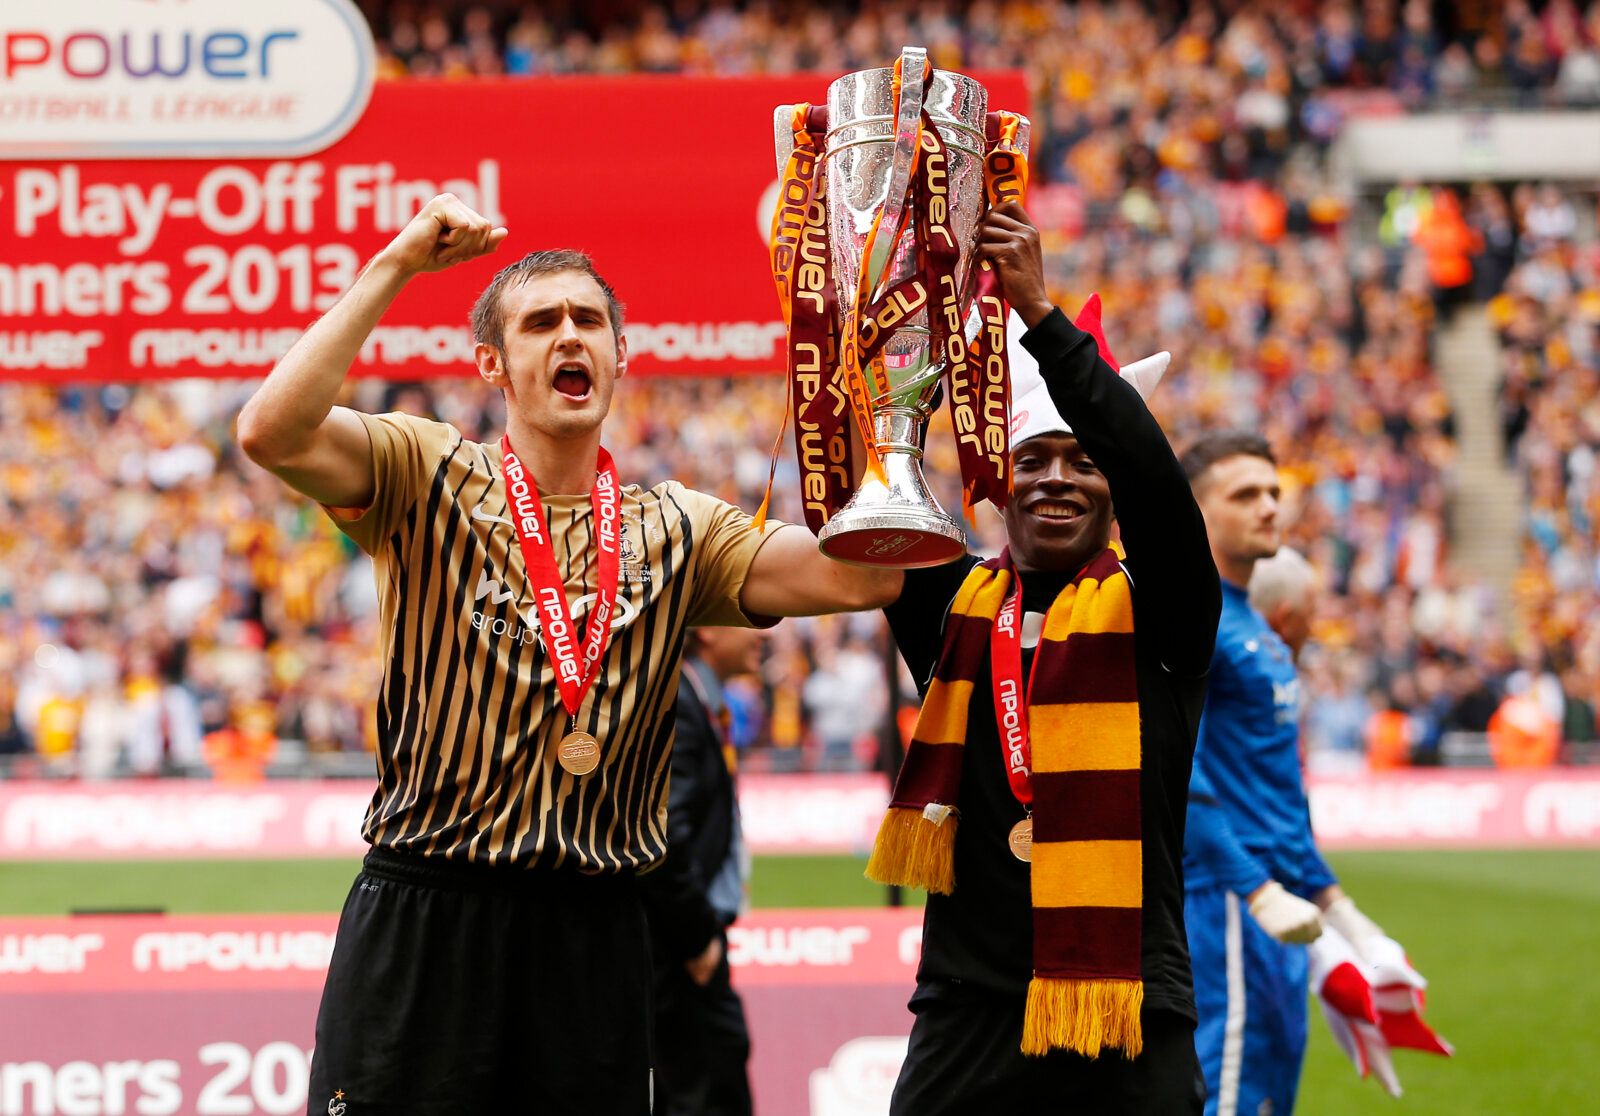 Football - Bradford City v Northampton Town - npower Football League Two Play-Off Final - Wembley Stadium - 18/5/13 
Bradford City's Kyel Reid and James Hanson celebrate promotion to League one with the trophy 
Mandatory Credit: Action Images / John Sibley 
Livepic 
EDITORIAL USE ONLY. No use with unauthorized audio, video, data, fixture lists, club/league logos or live services. Online in-match use limited to 45 images, no video emulation. No use in betting, games or single club/league/player p